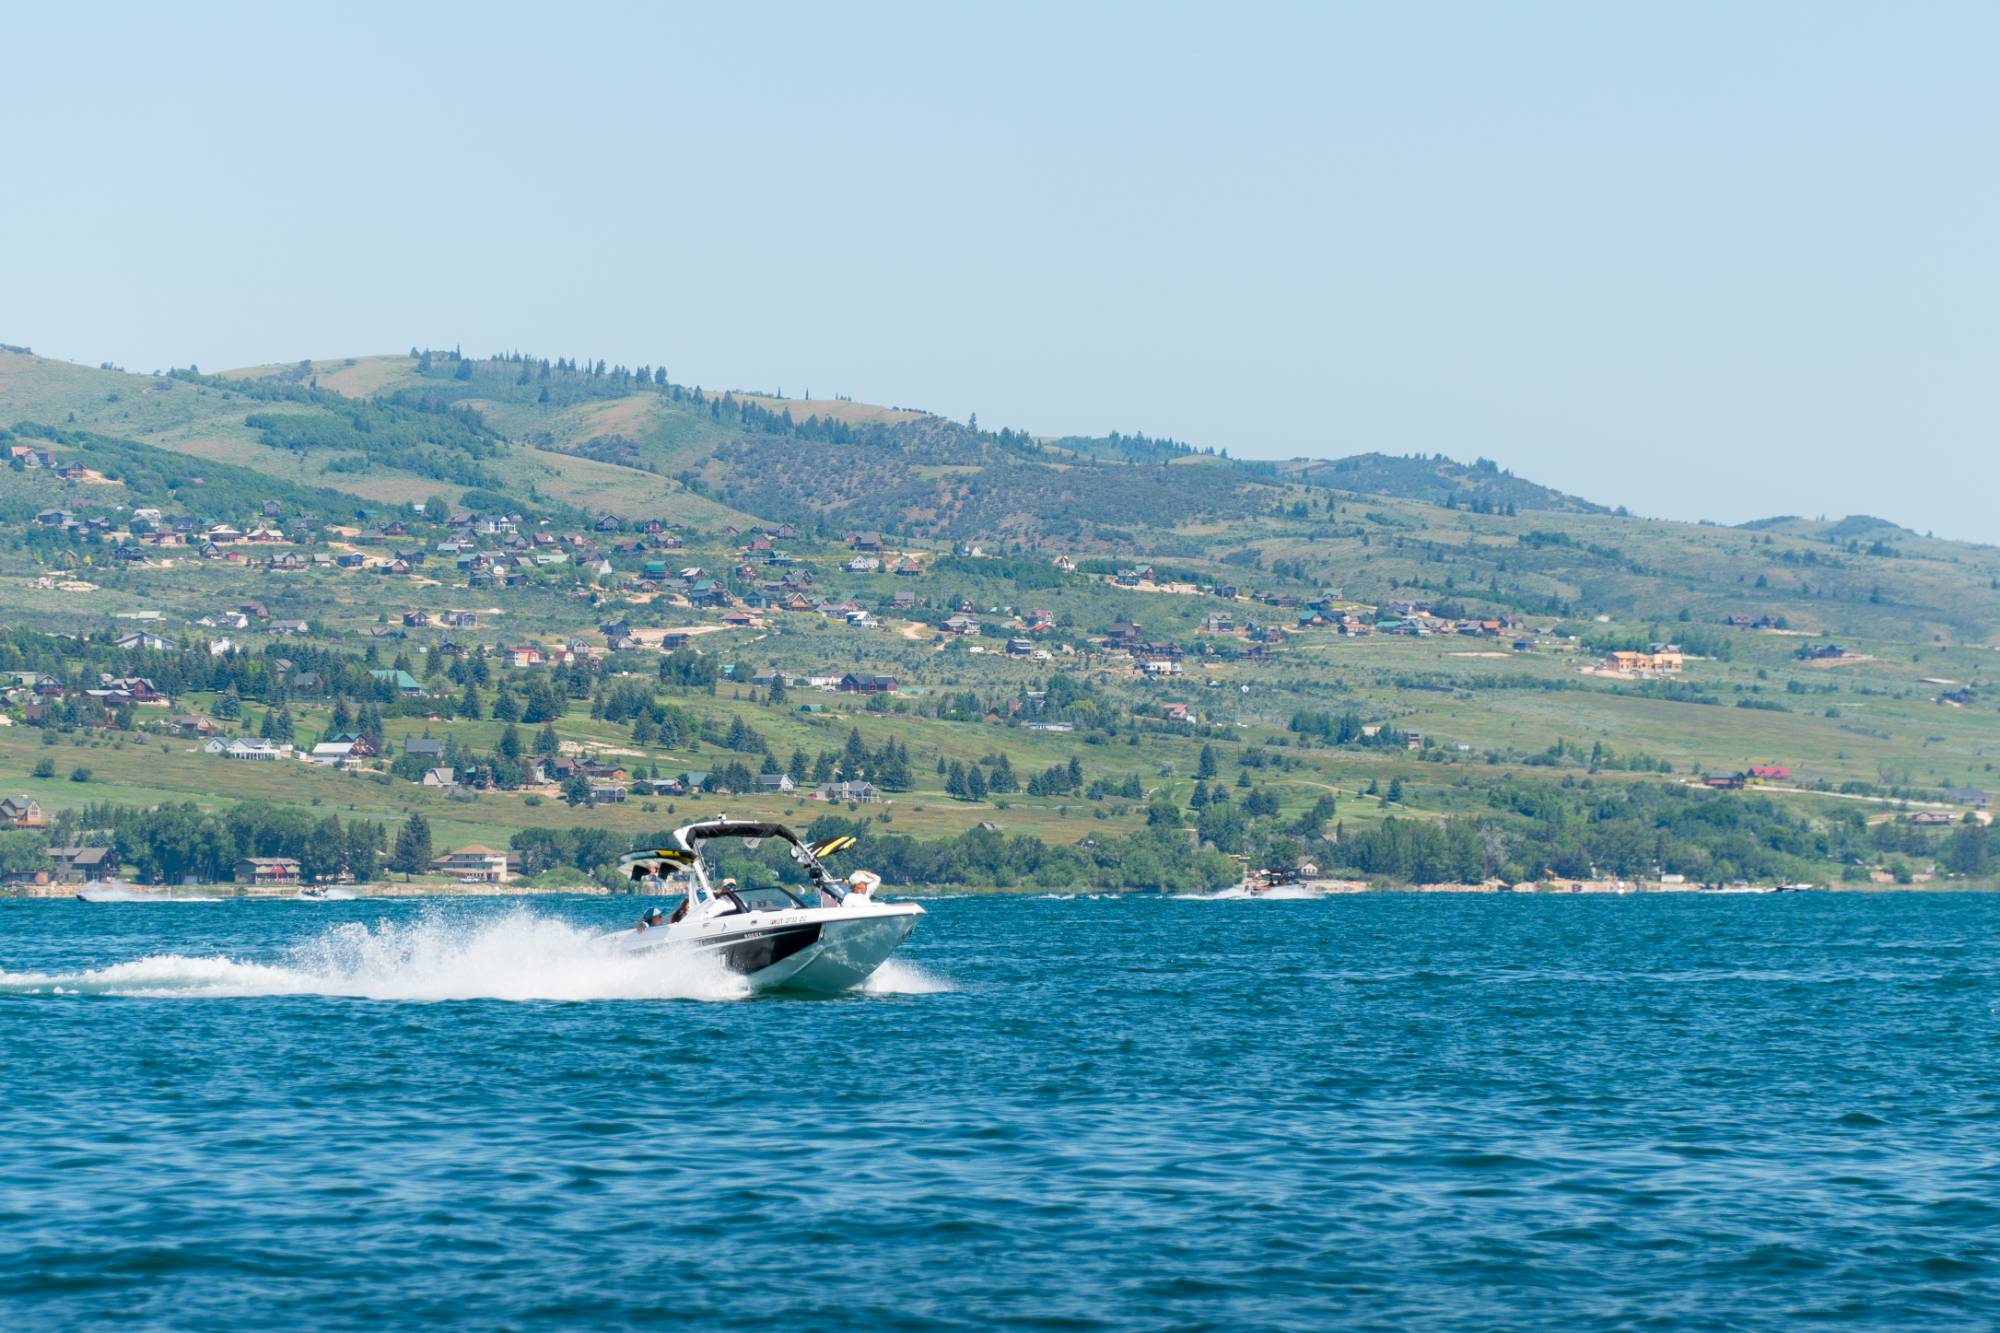 A motorboat sprays water and churns up a wake as it speeds across the surface of Bear Lake on a sunny day. Mountain foothills dotted with cabins can be seen in the background beneath a blue sky.